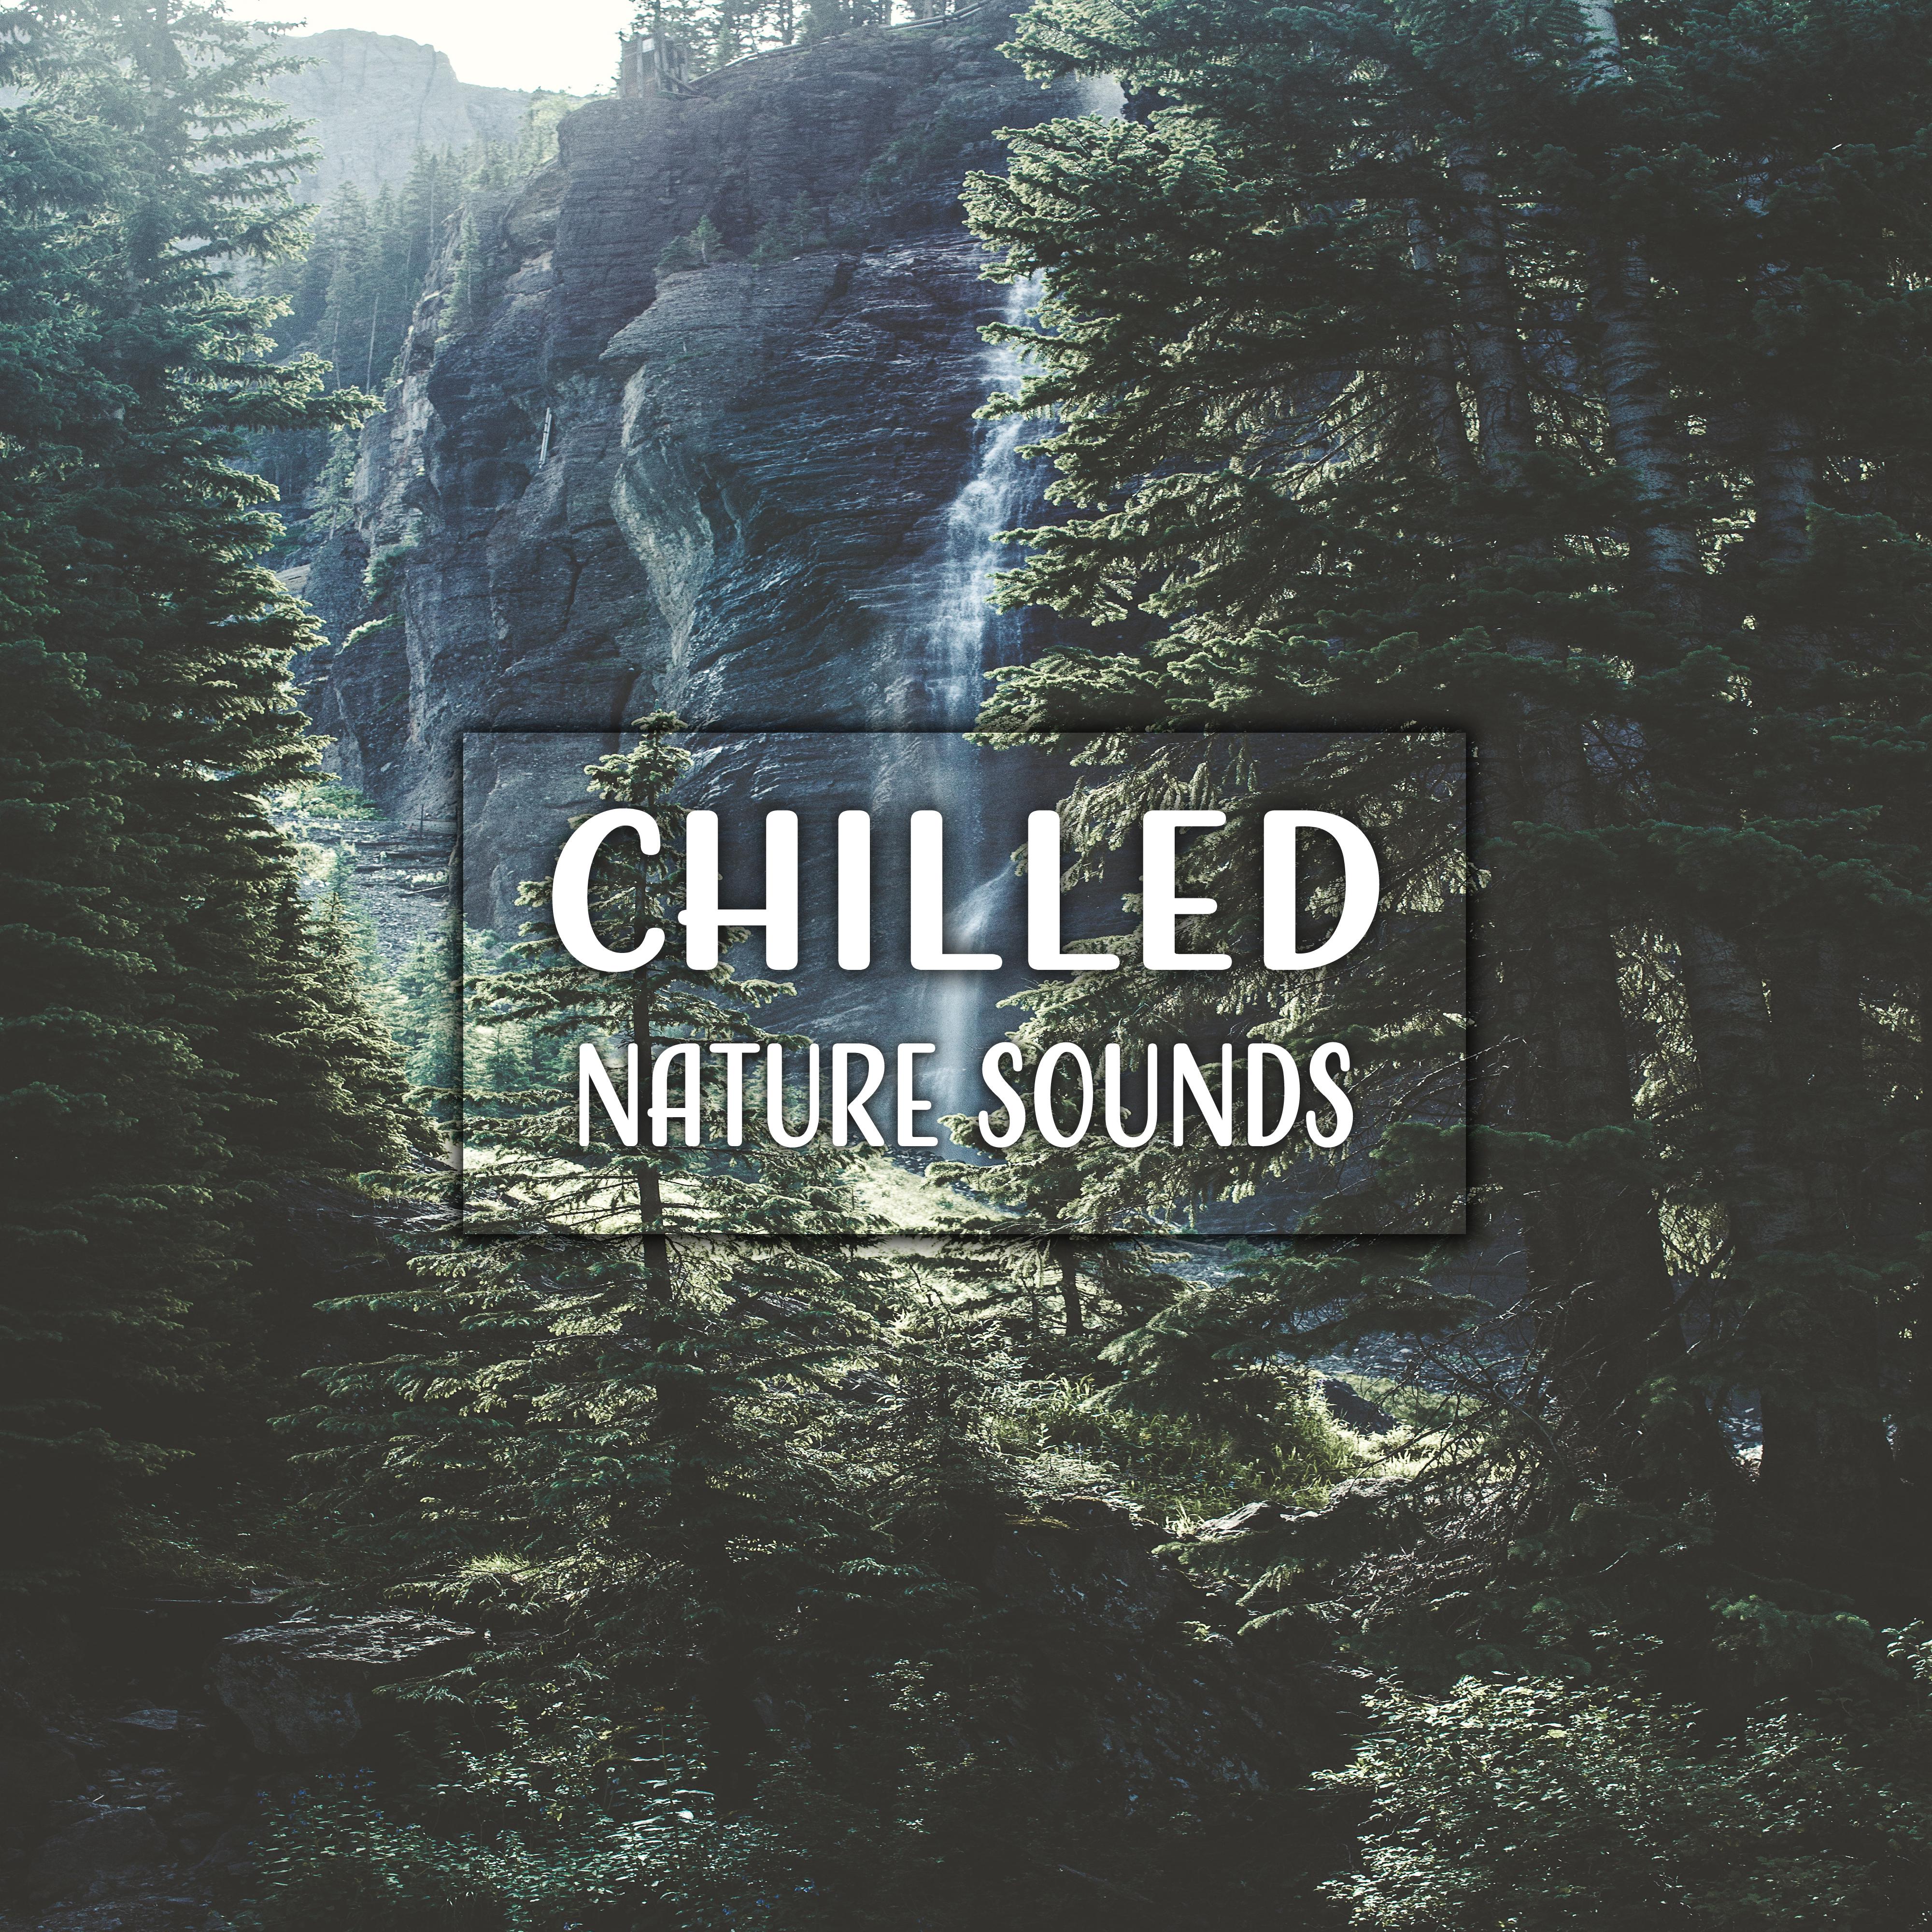 Chilled Nature Sounds  Relaxing Music, Nature Sounds, Rest, Zen, Bliss, Healing Music Therapy